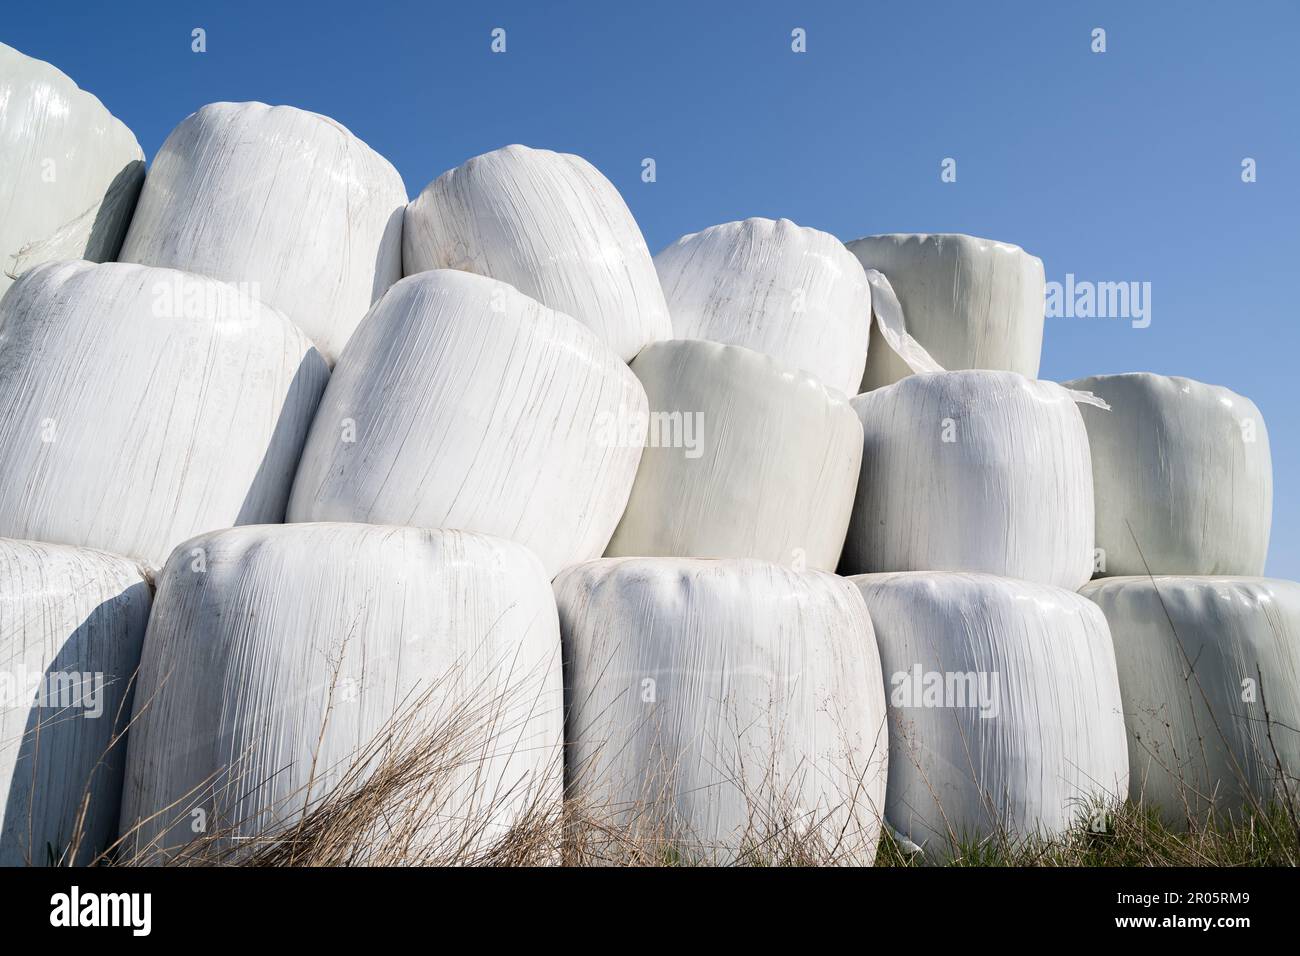 Wrapped and stacked hay bales with blue sky in the background Stock Photo